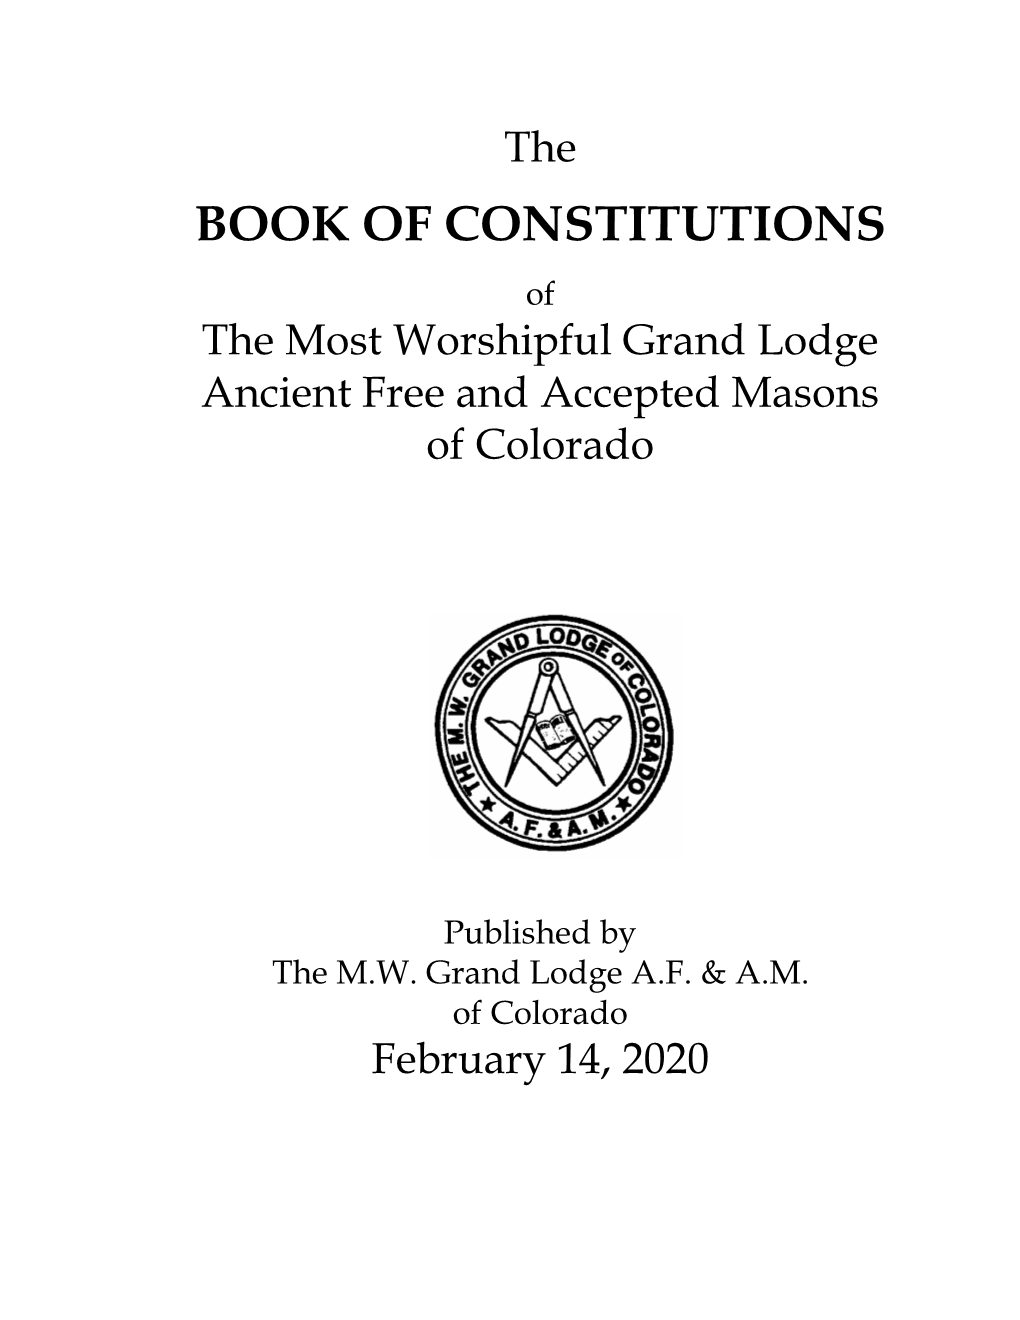 BOOK of CONSTITUTIONS of the Most Worshipful Grand Lodge Ancient Free and Accepted Masons of Colorado